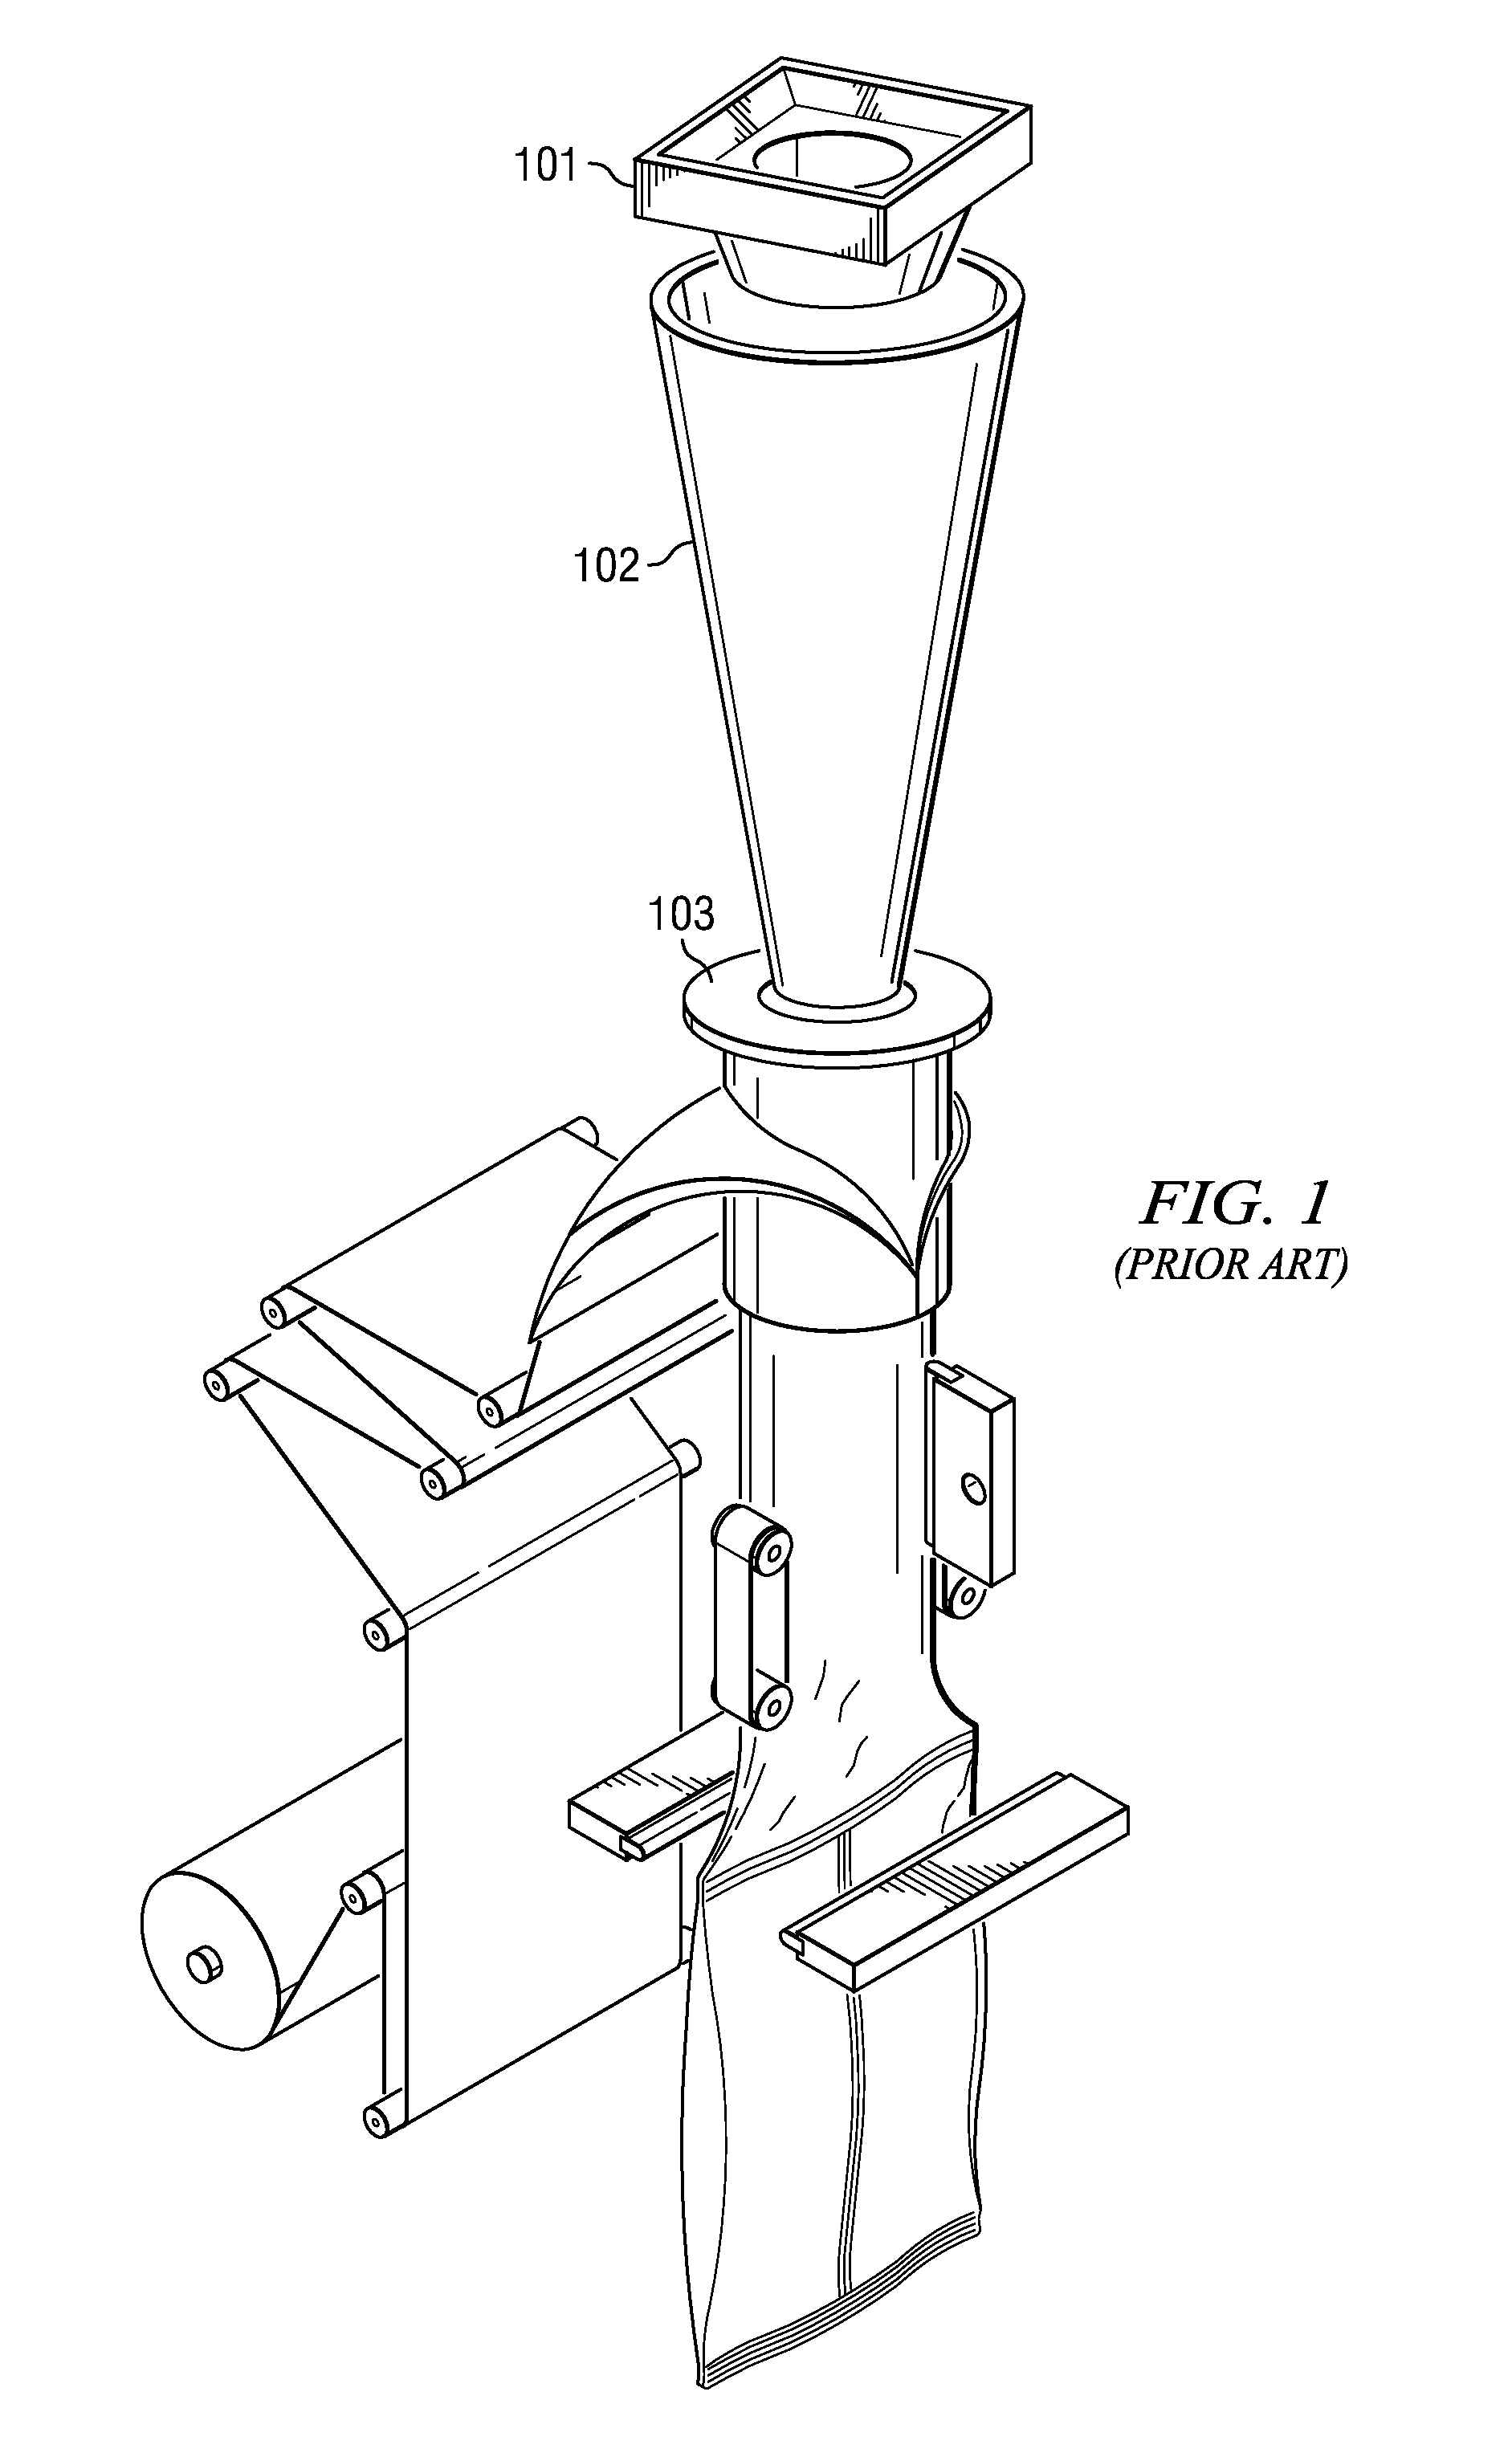 Method and apparatus for compacting product